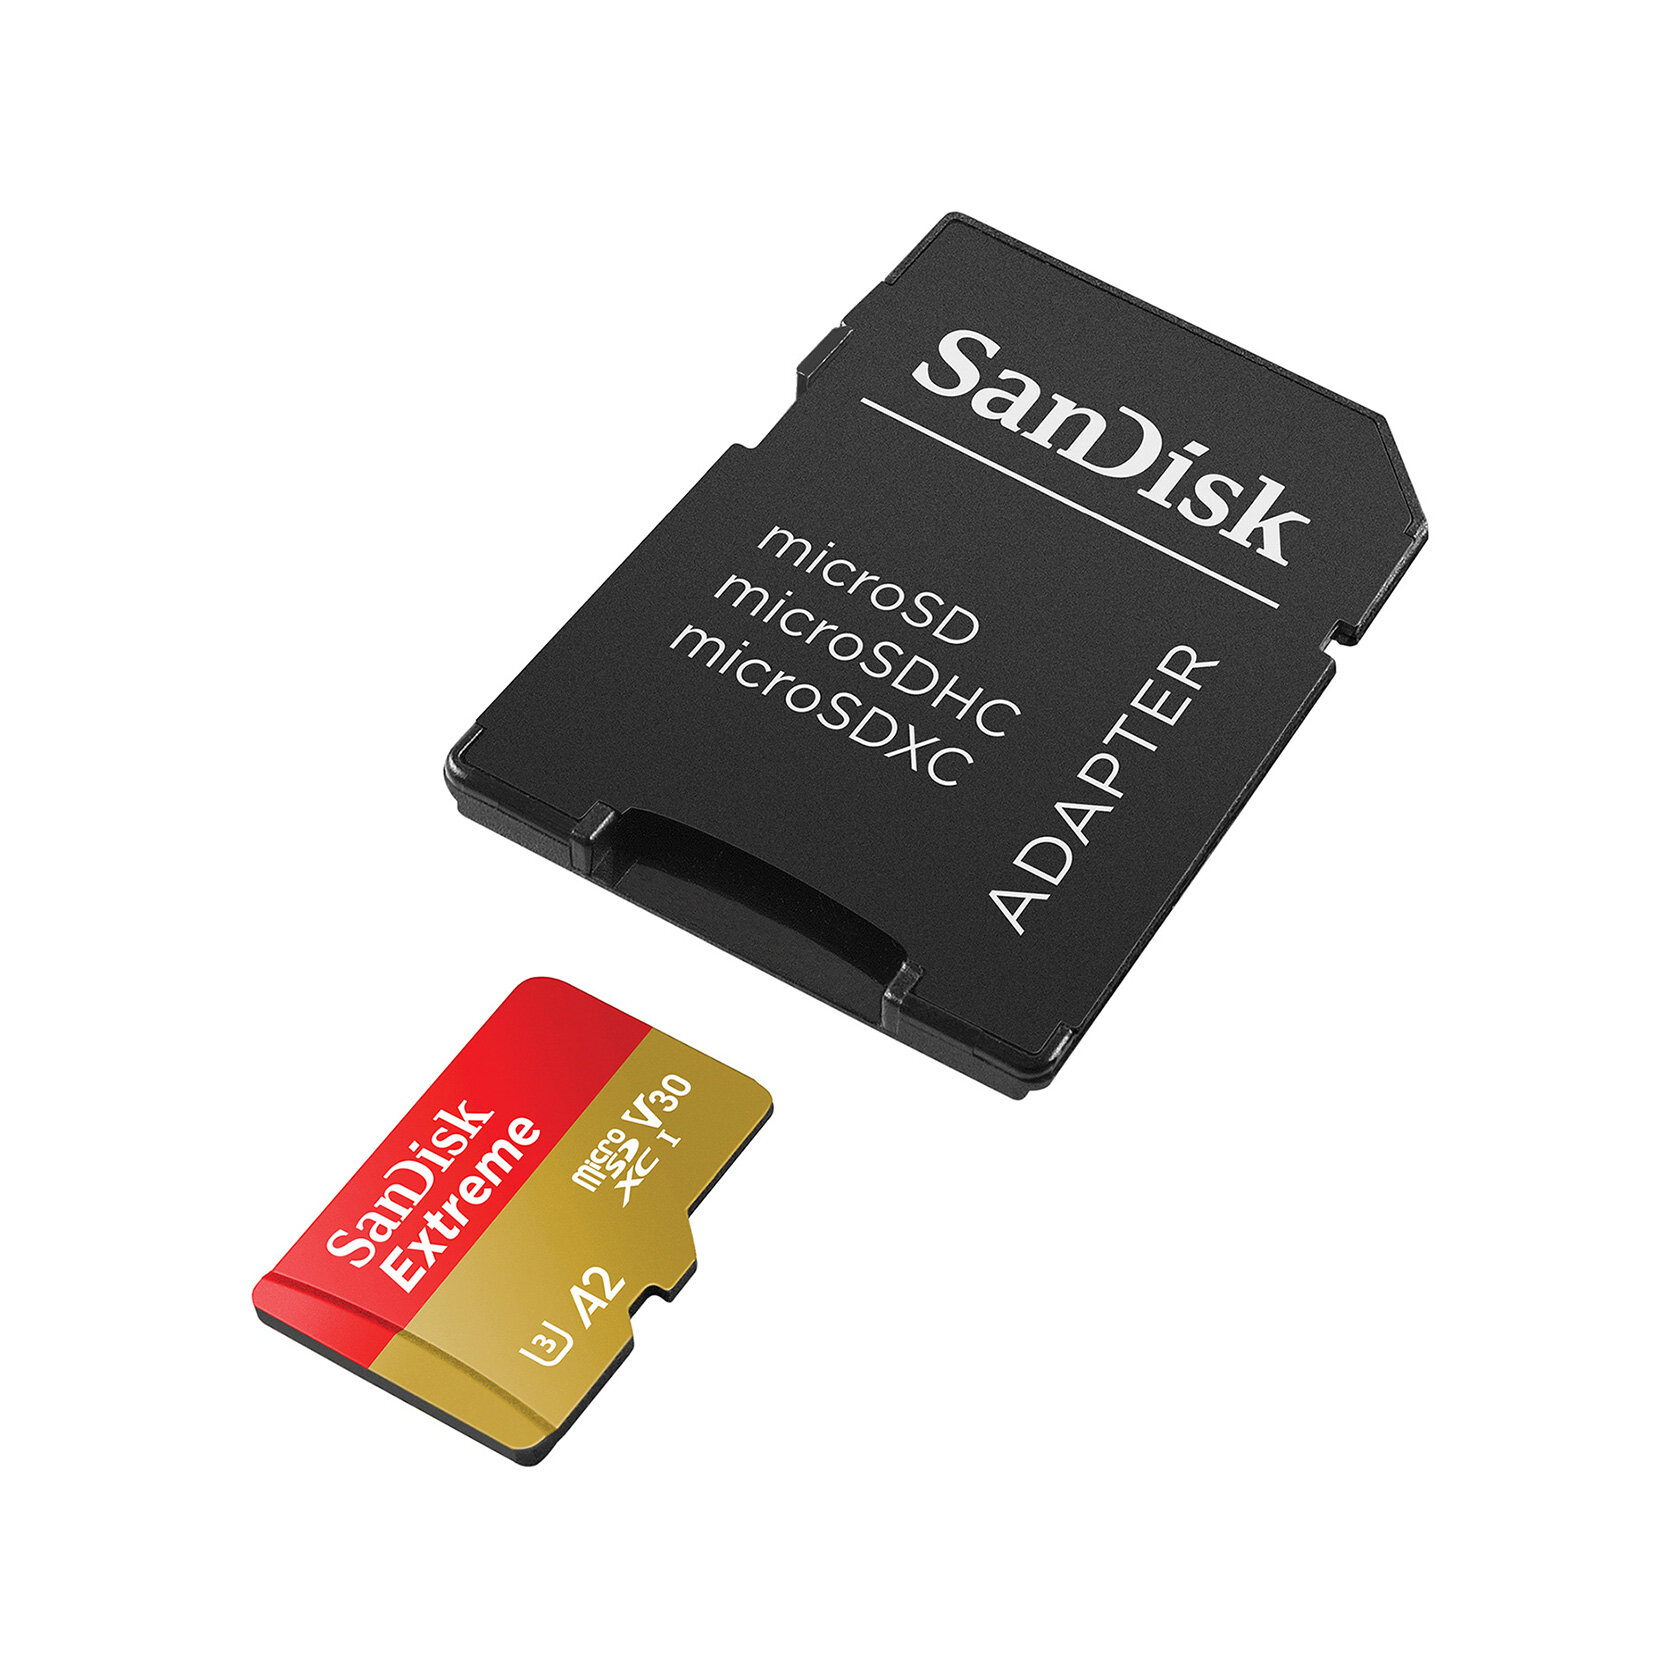 SanDisk Launches Fastest 1TB MicroSD Card Yet at 165MB Per Second